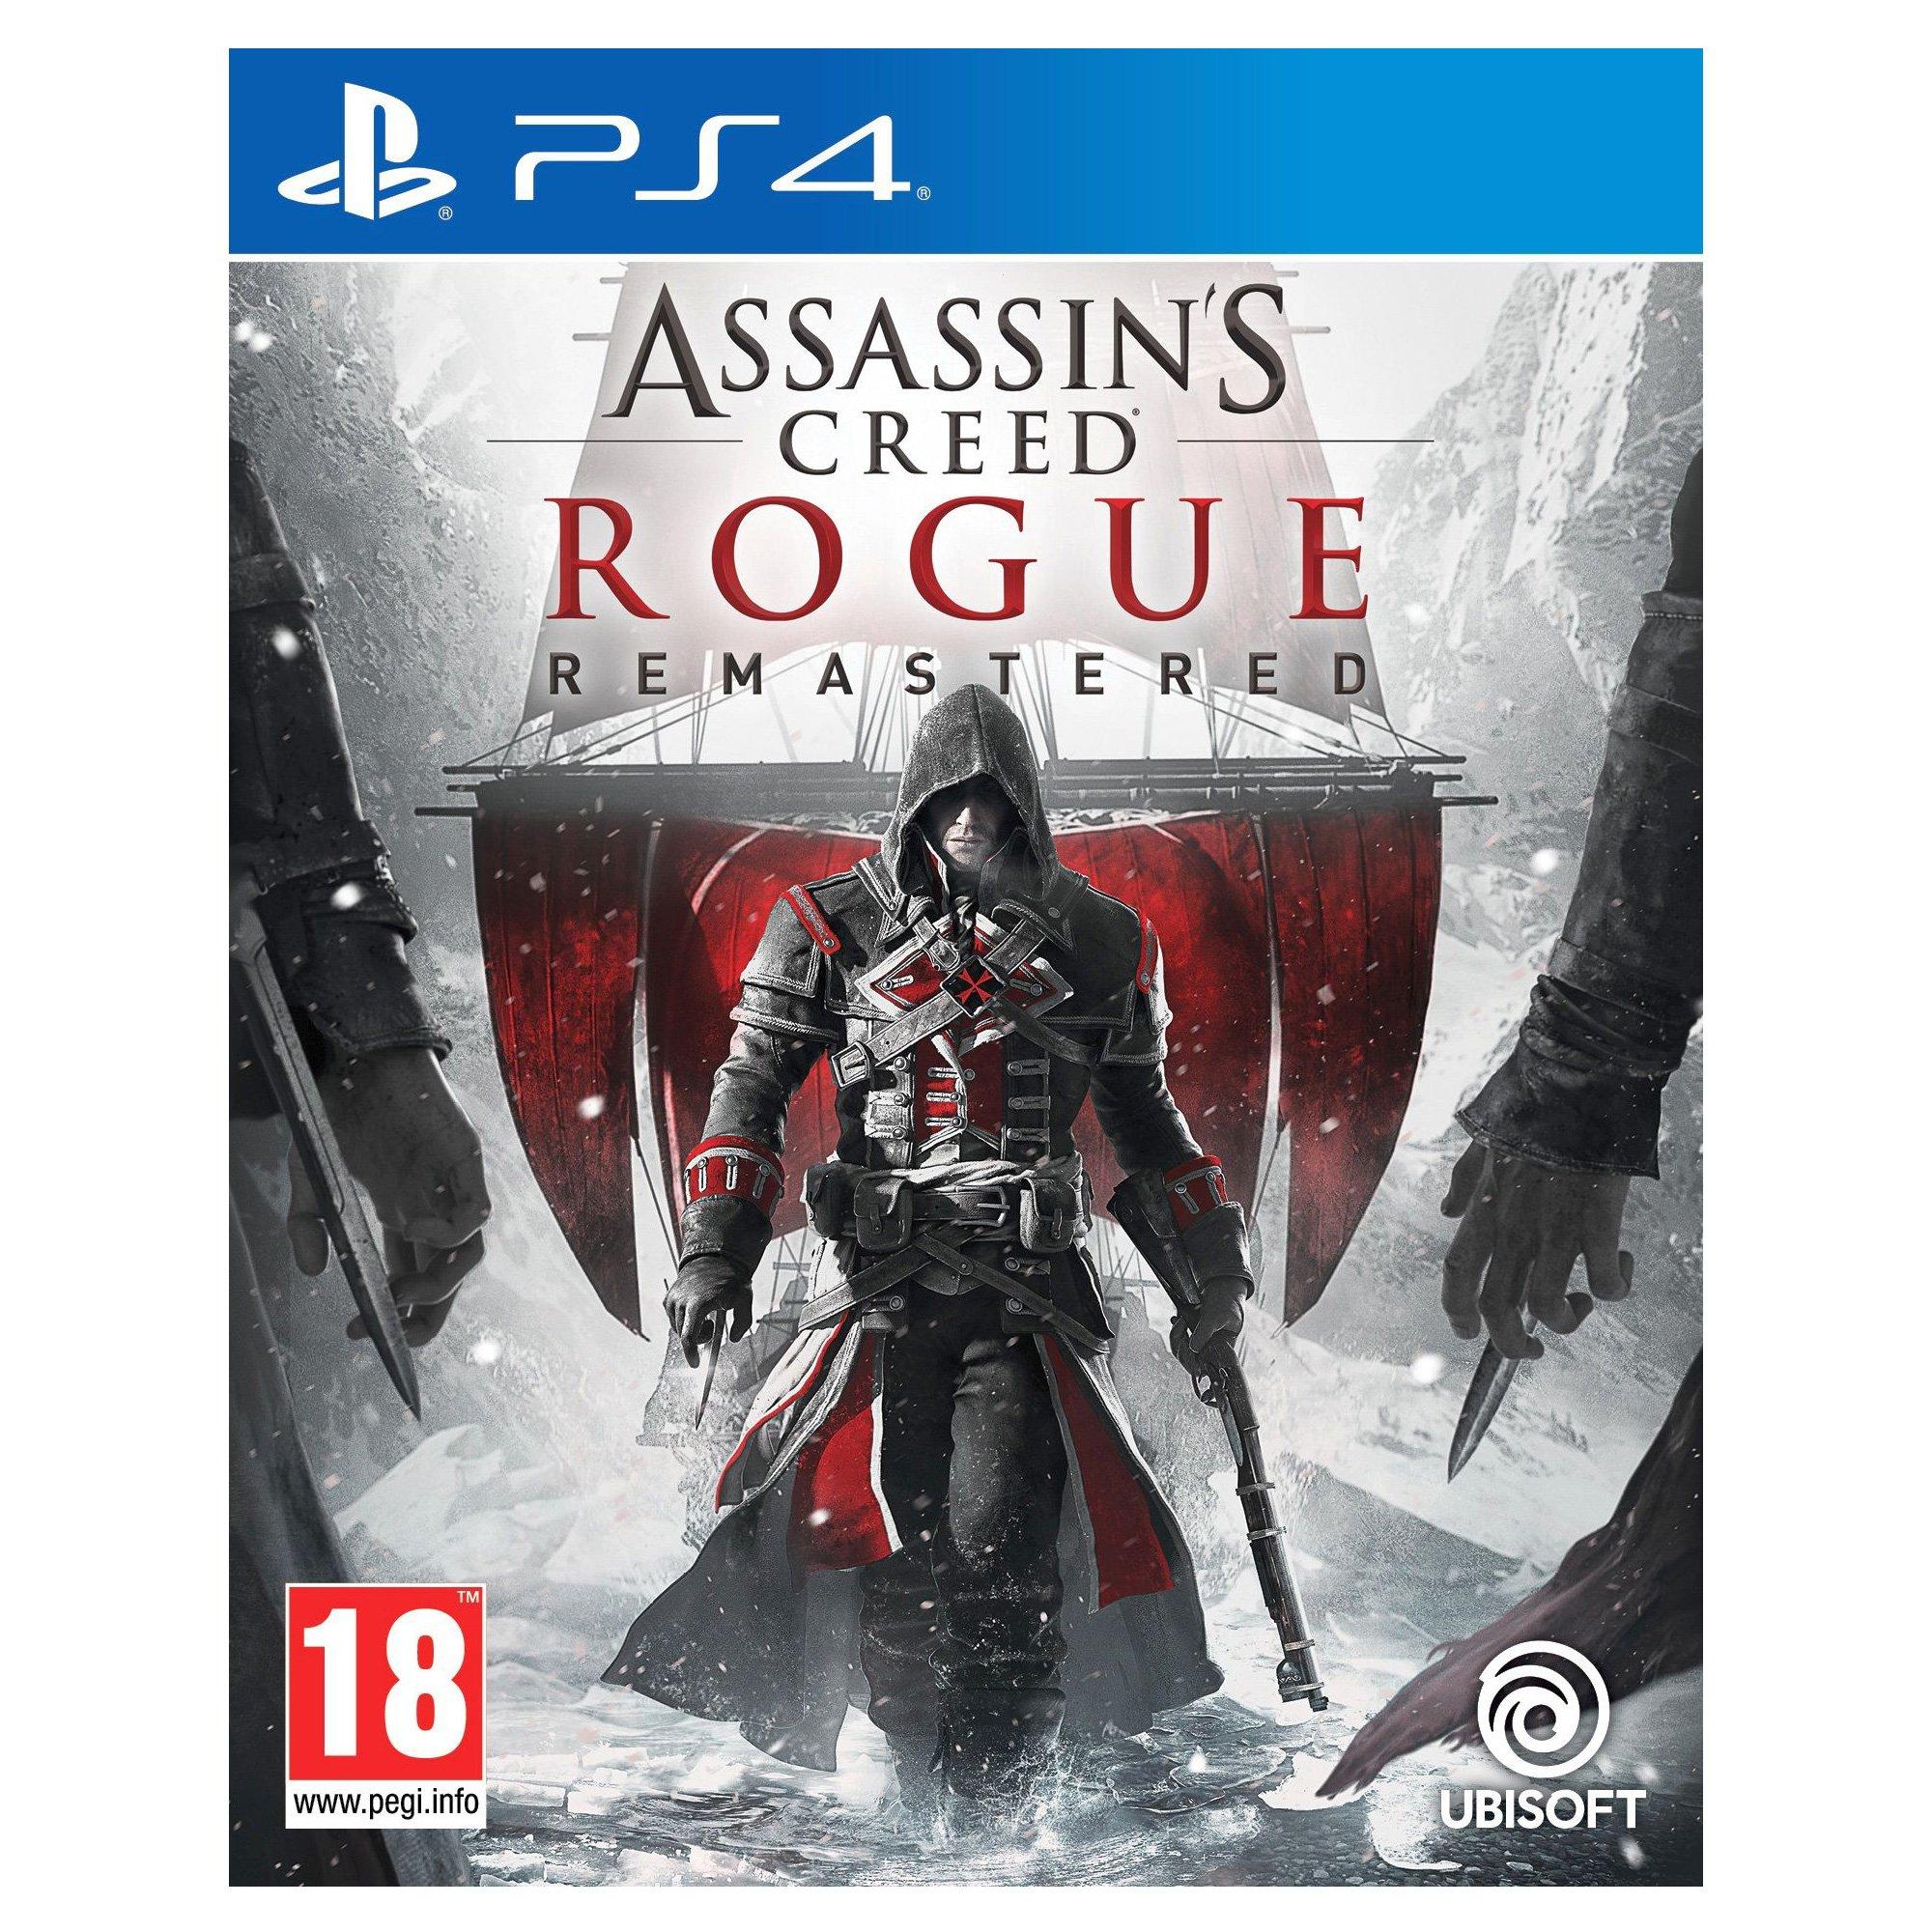 Image of UBISOFT Assassin's Creed Rogue - Remastered, PS4, De, Fr, It